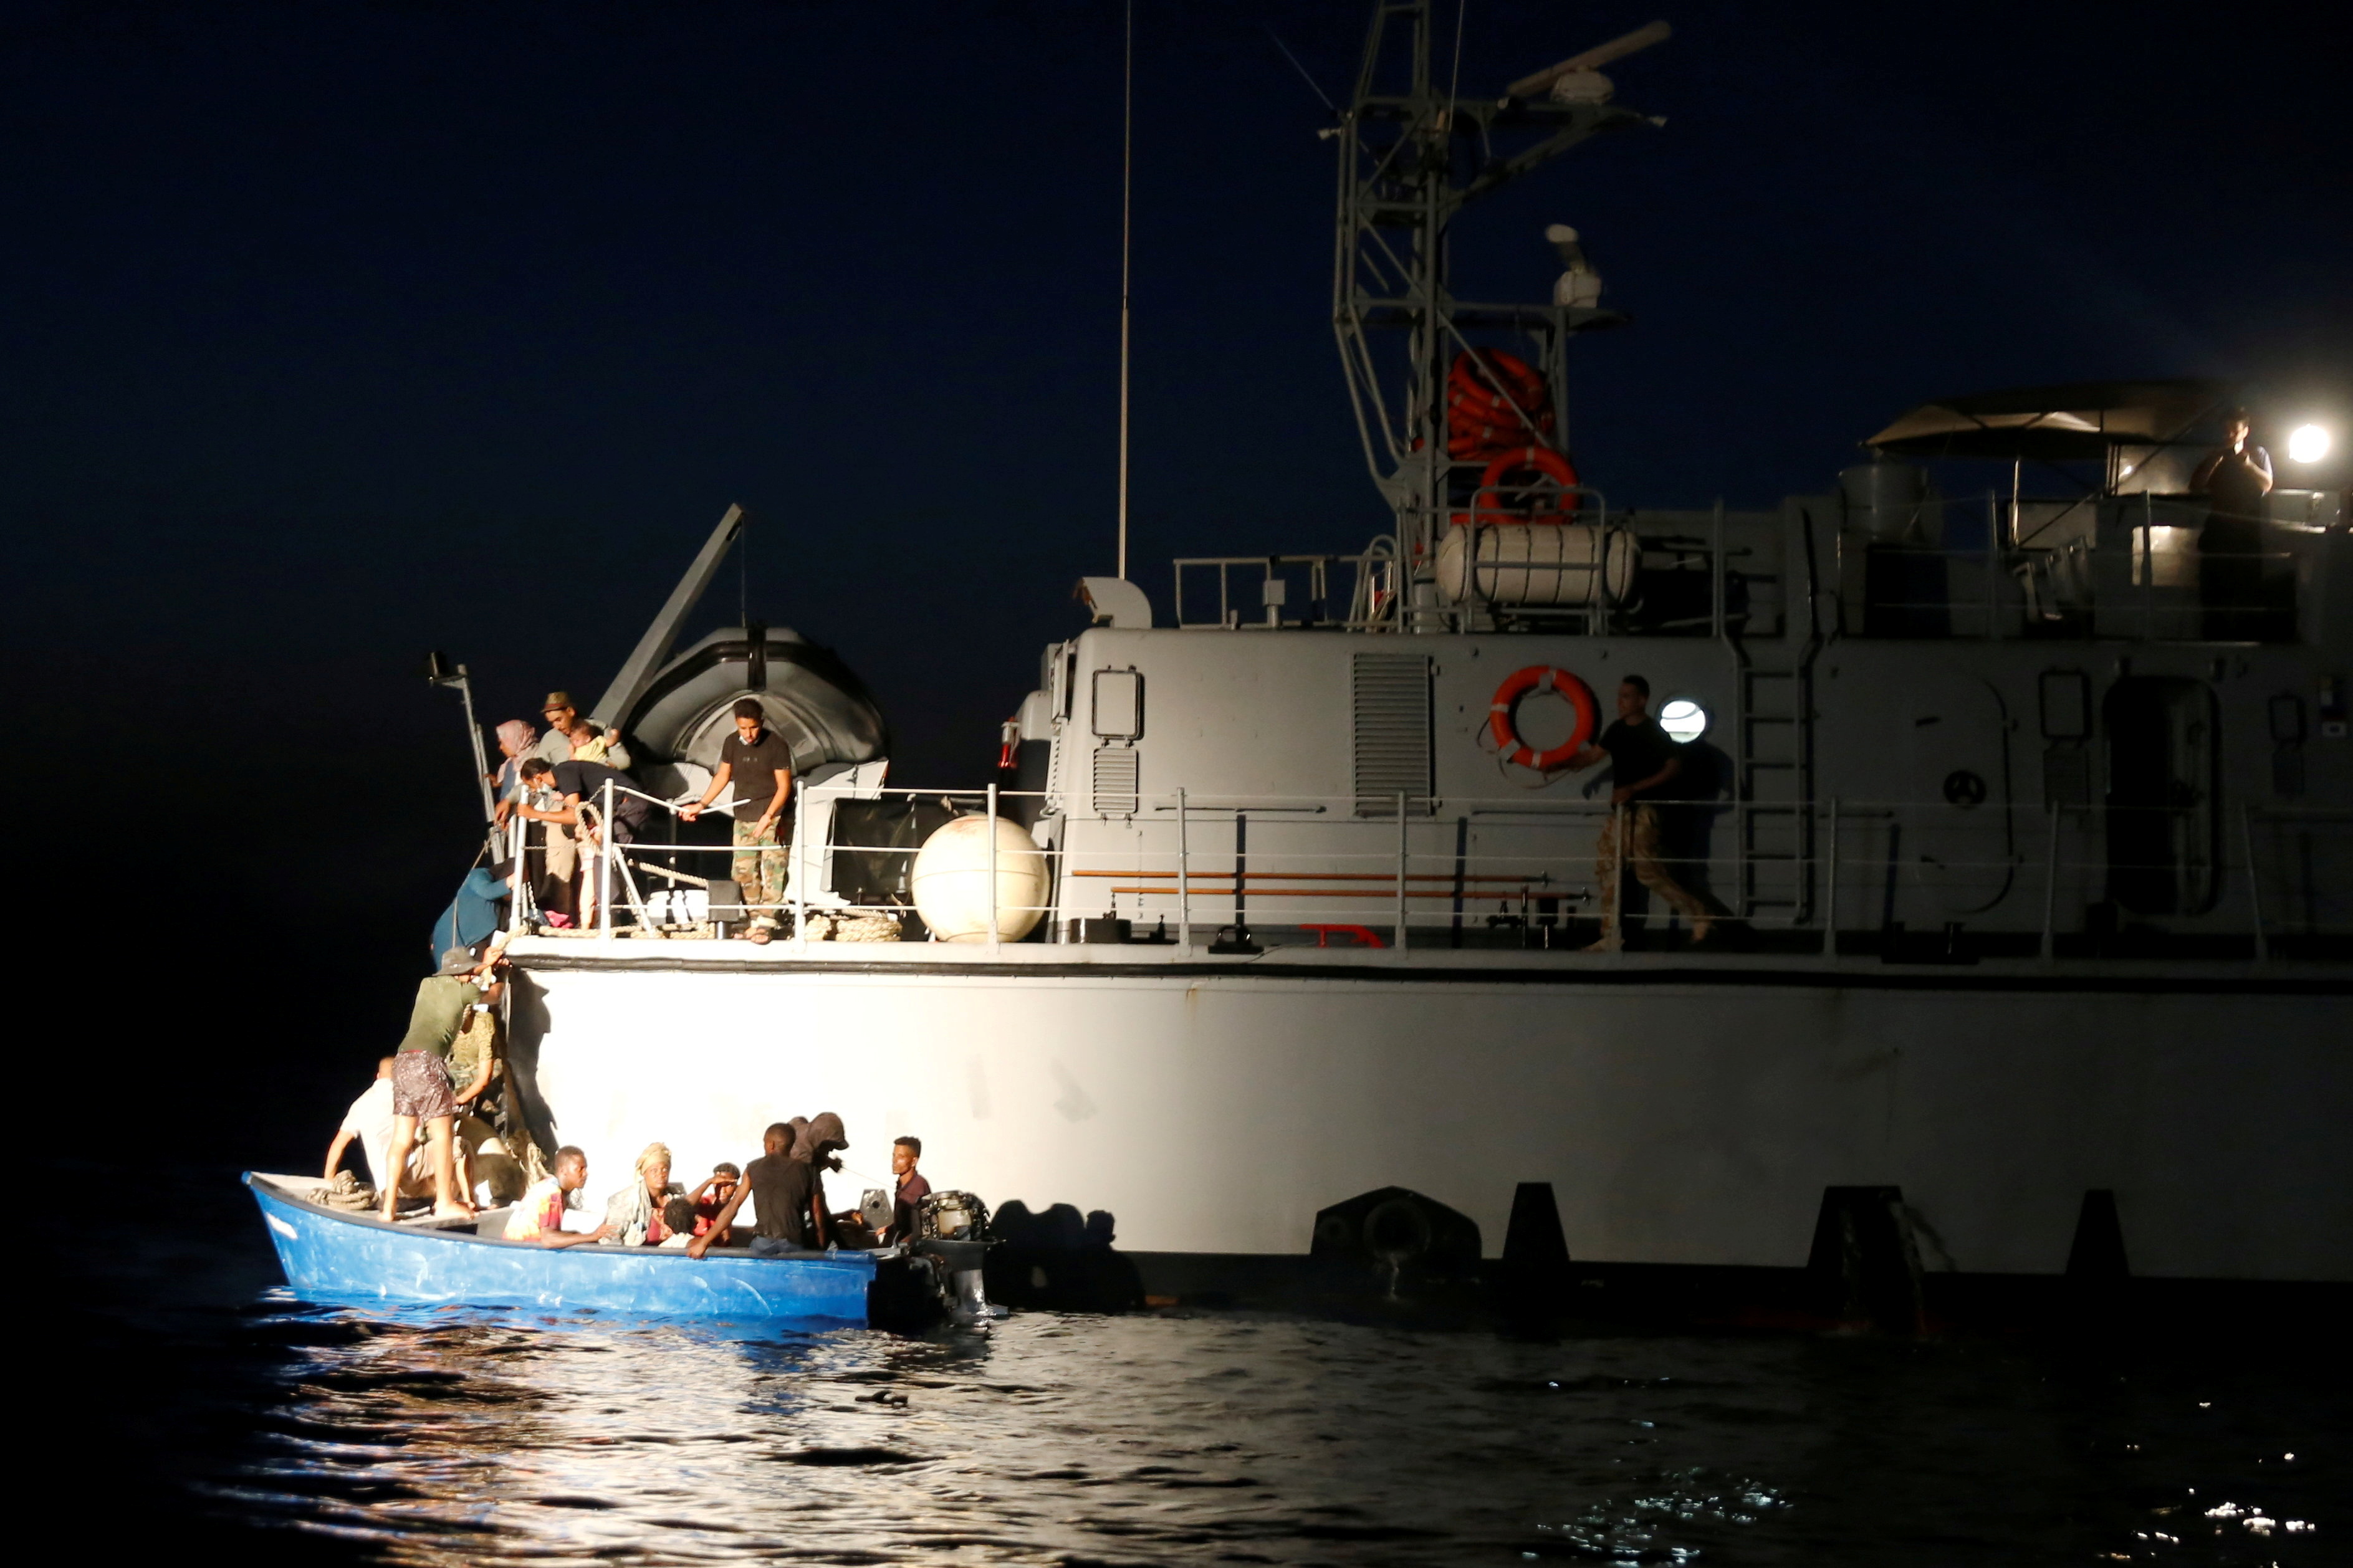 German NGO migrant rescue ship Sea-Watch 3 rescues migrants in Maltese search and rescue zone